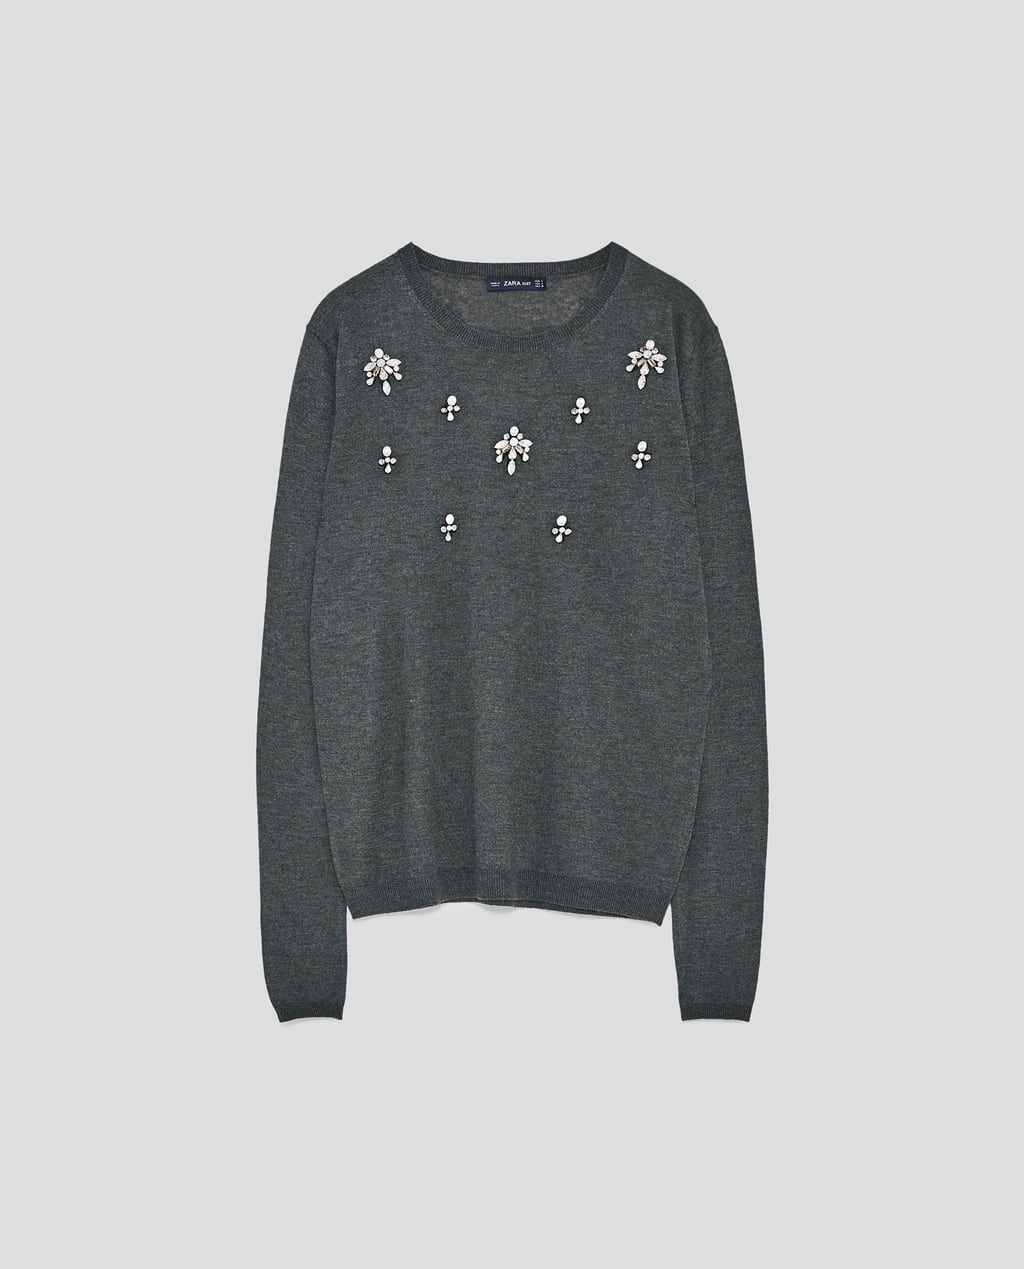 SWEATER WITH BEJEWELLED APPLIQUÉS